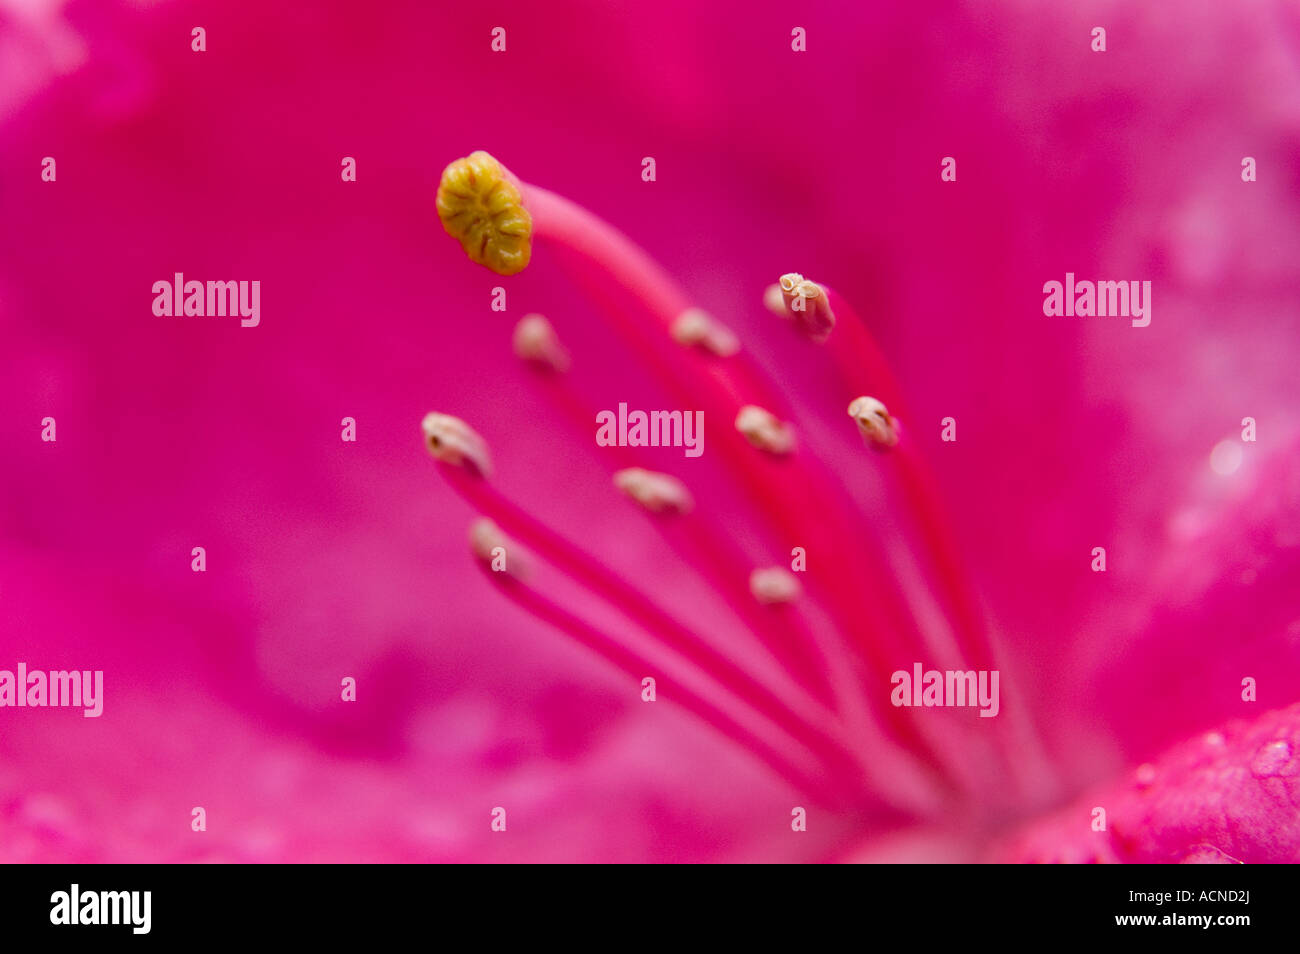 Close up view of pistil and stamens of a rhododendron blossom Beaverton OR Stock Photo